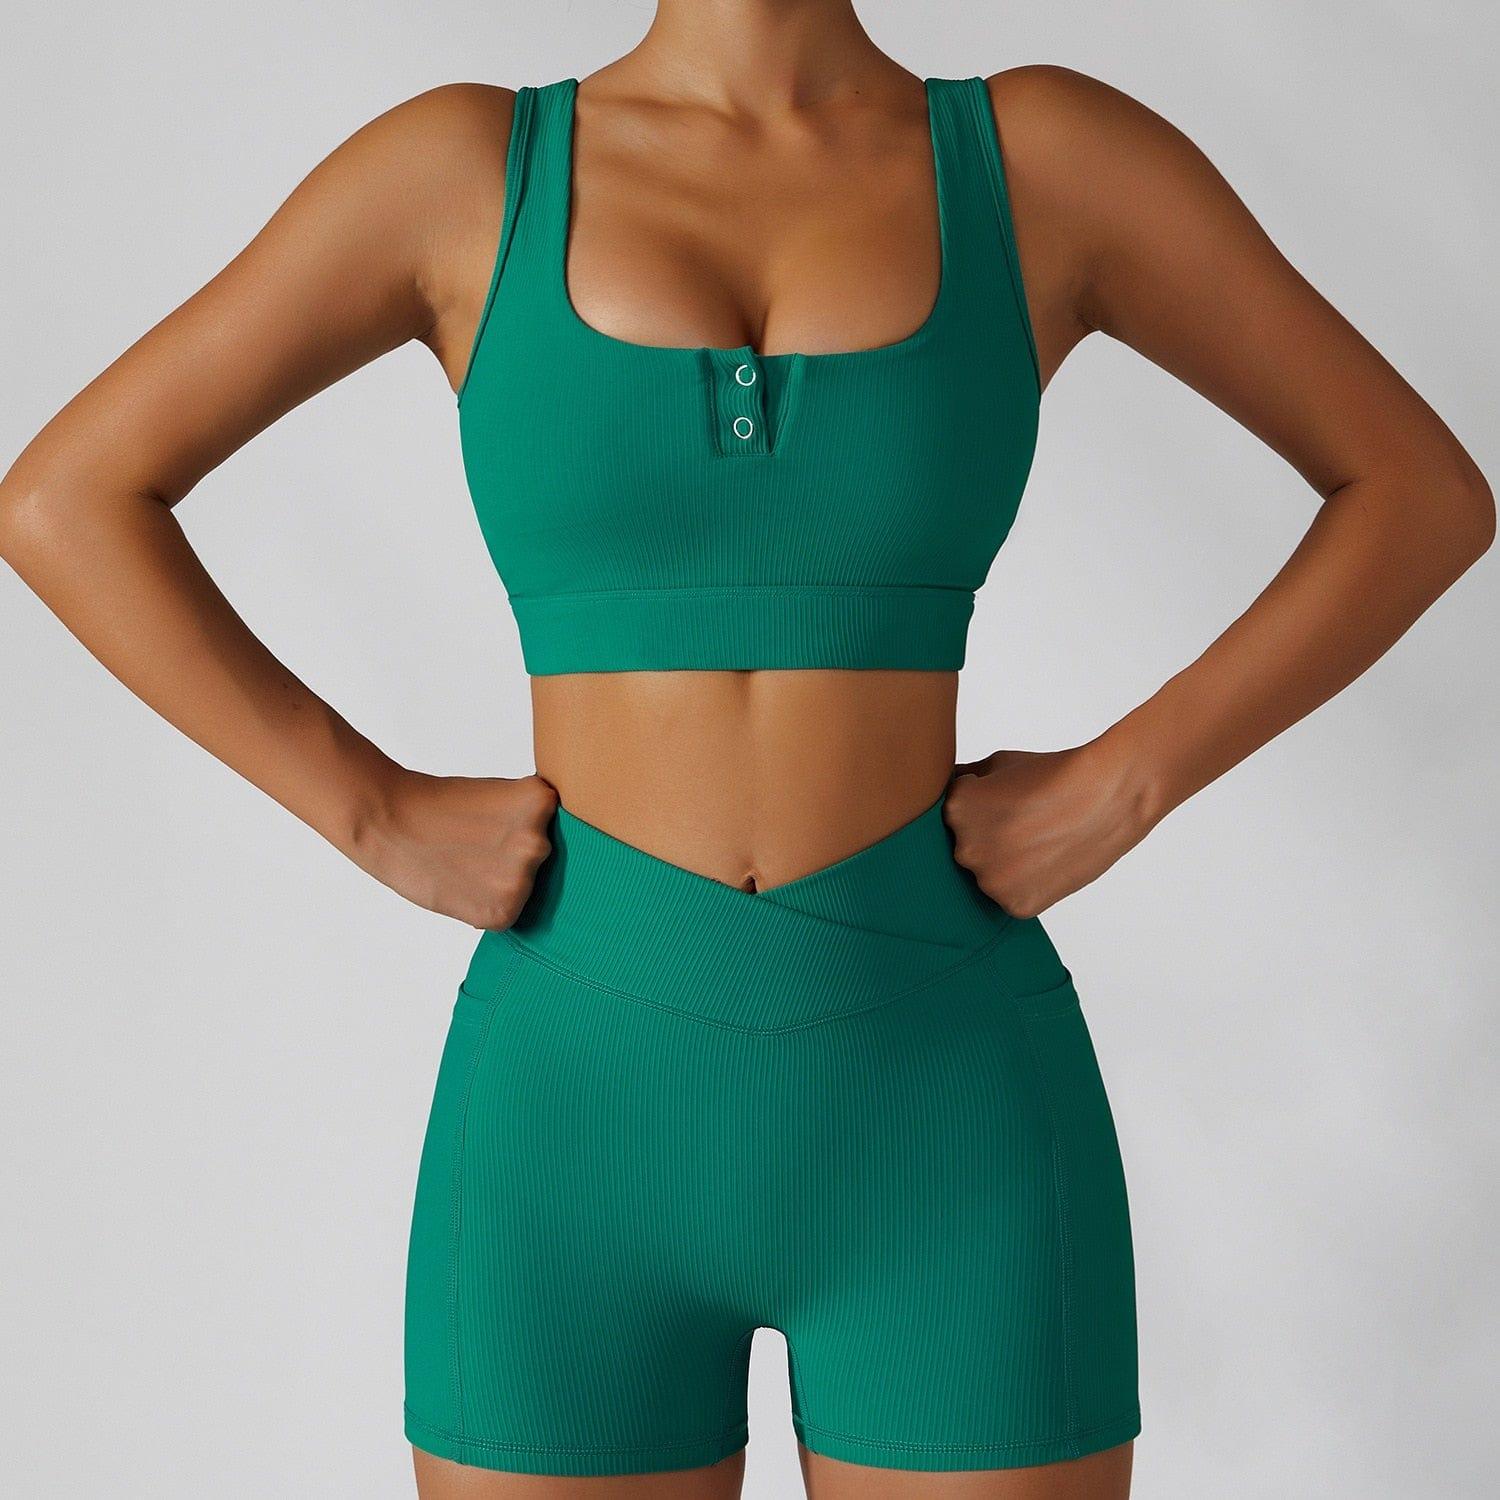 Shop 0 Green suit-1 / S / China 2 Pieces Seamless Women Tracksuit  Yoga Set Running Workout Sportswear Gym Clothes Fitness Bra High Waist Leggings Sports Suit Mademoiselle Home Decor